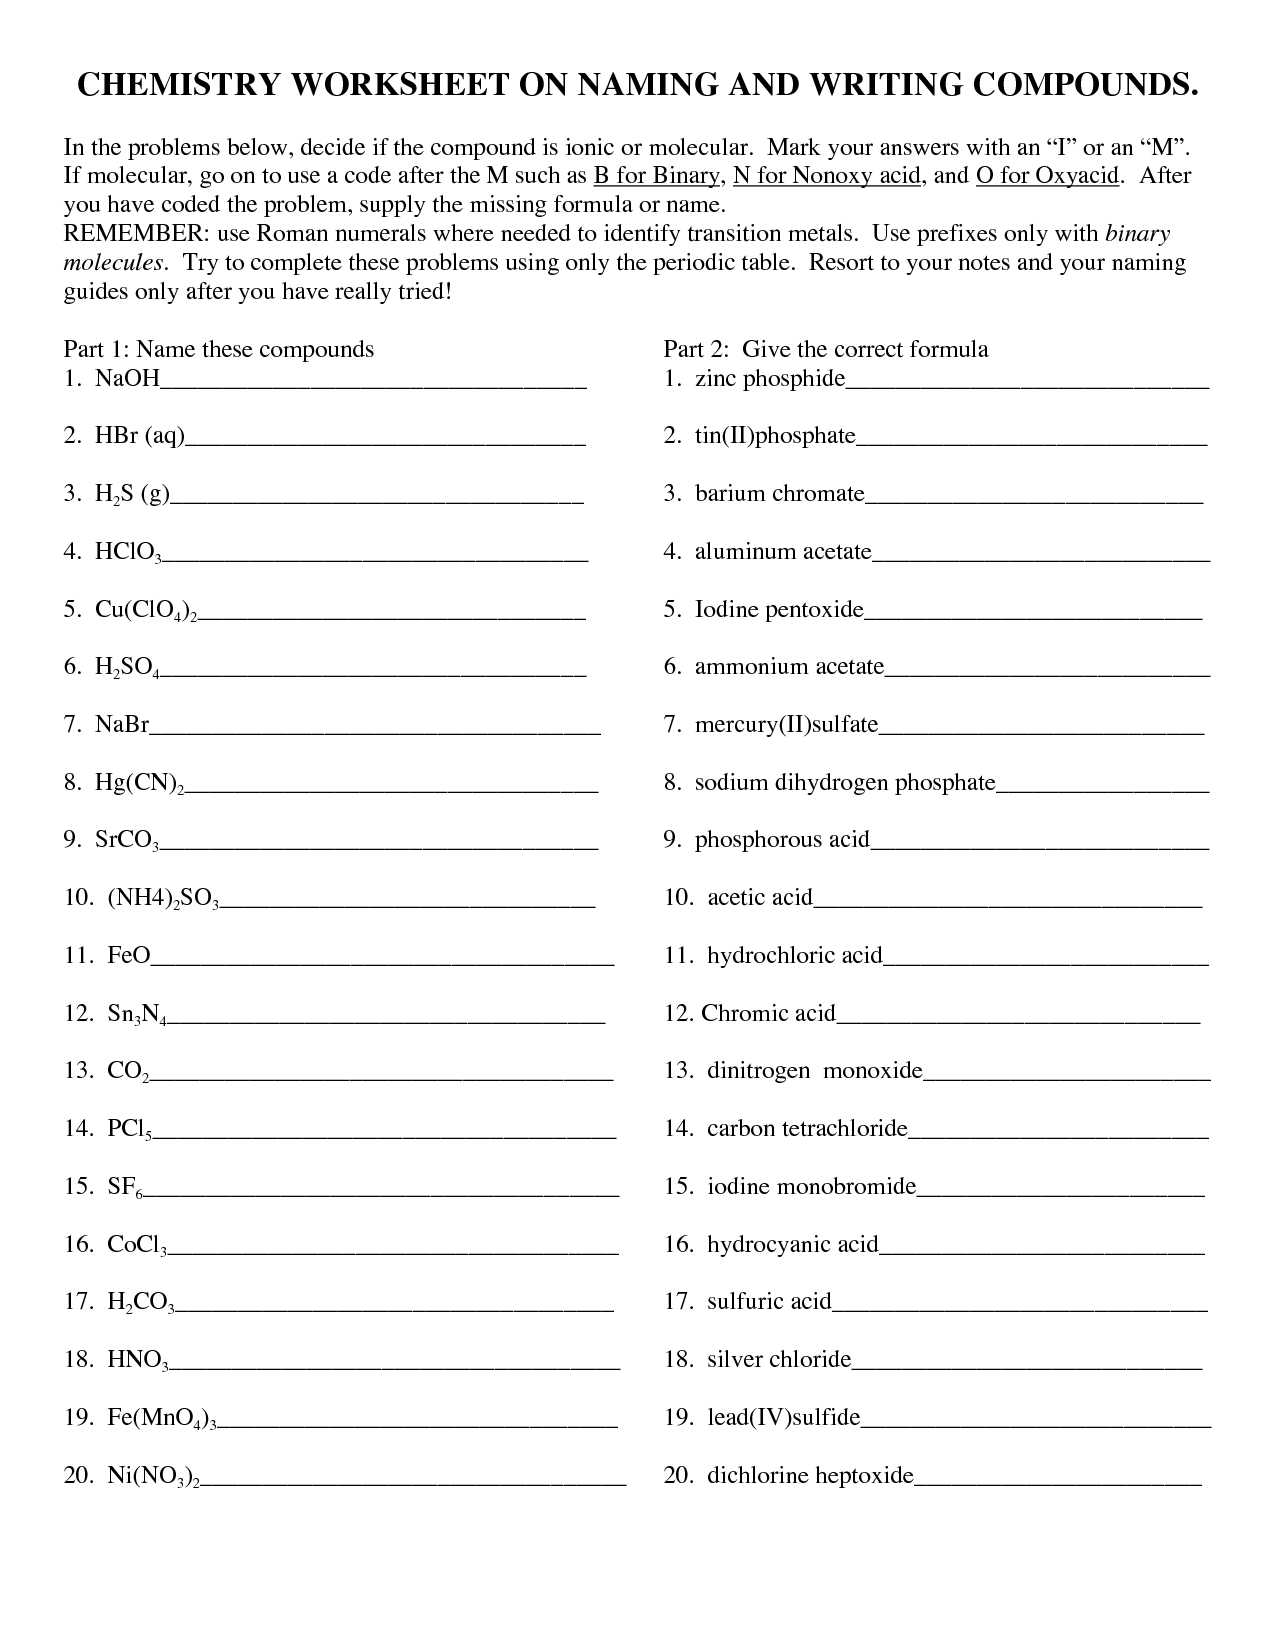 Nomenclature Worksheet 1 or Naming Other organic Pounds Worksheet Image Collections